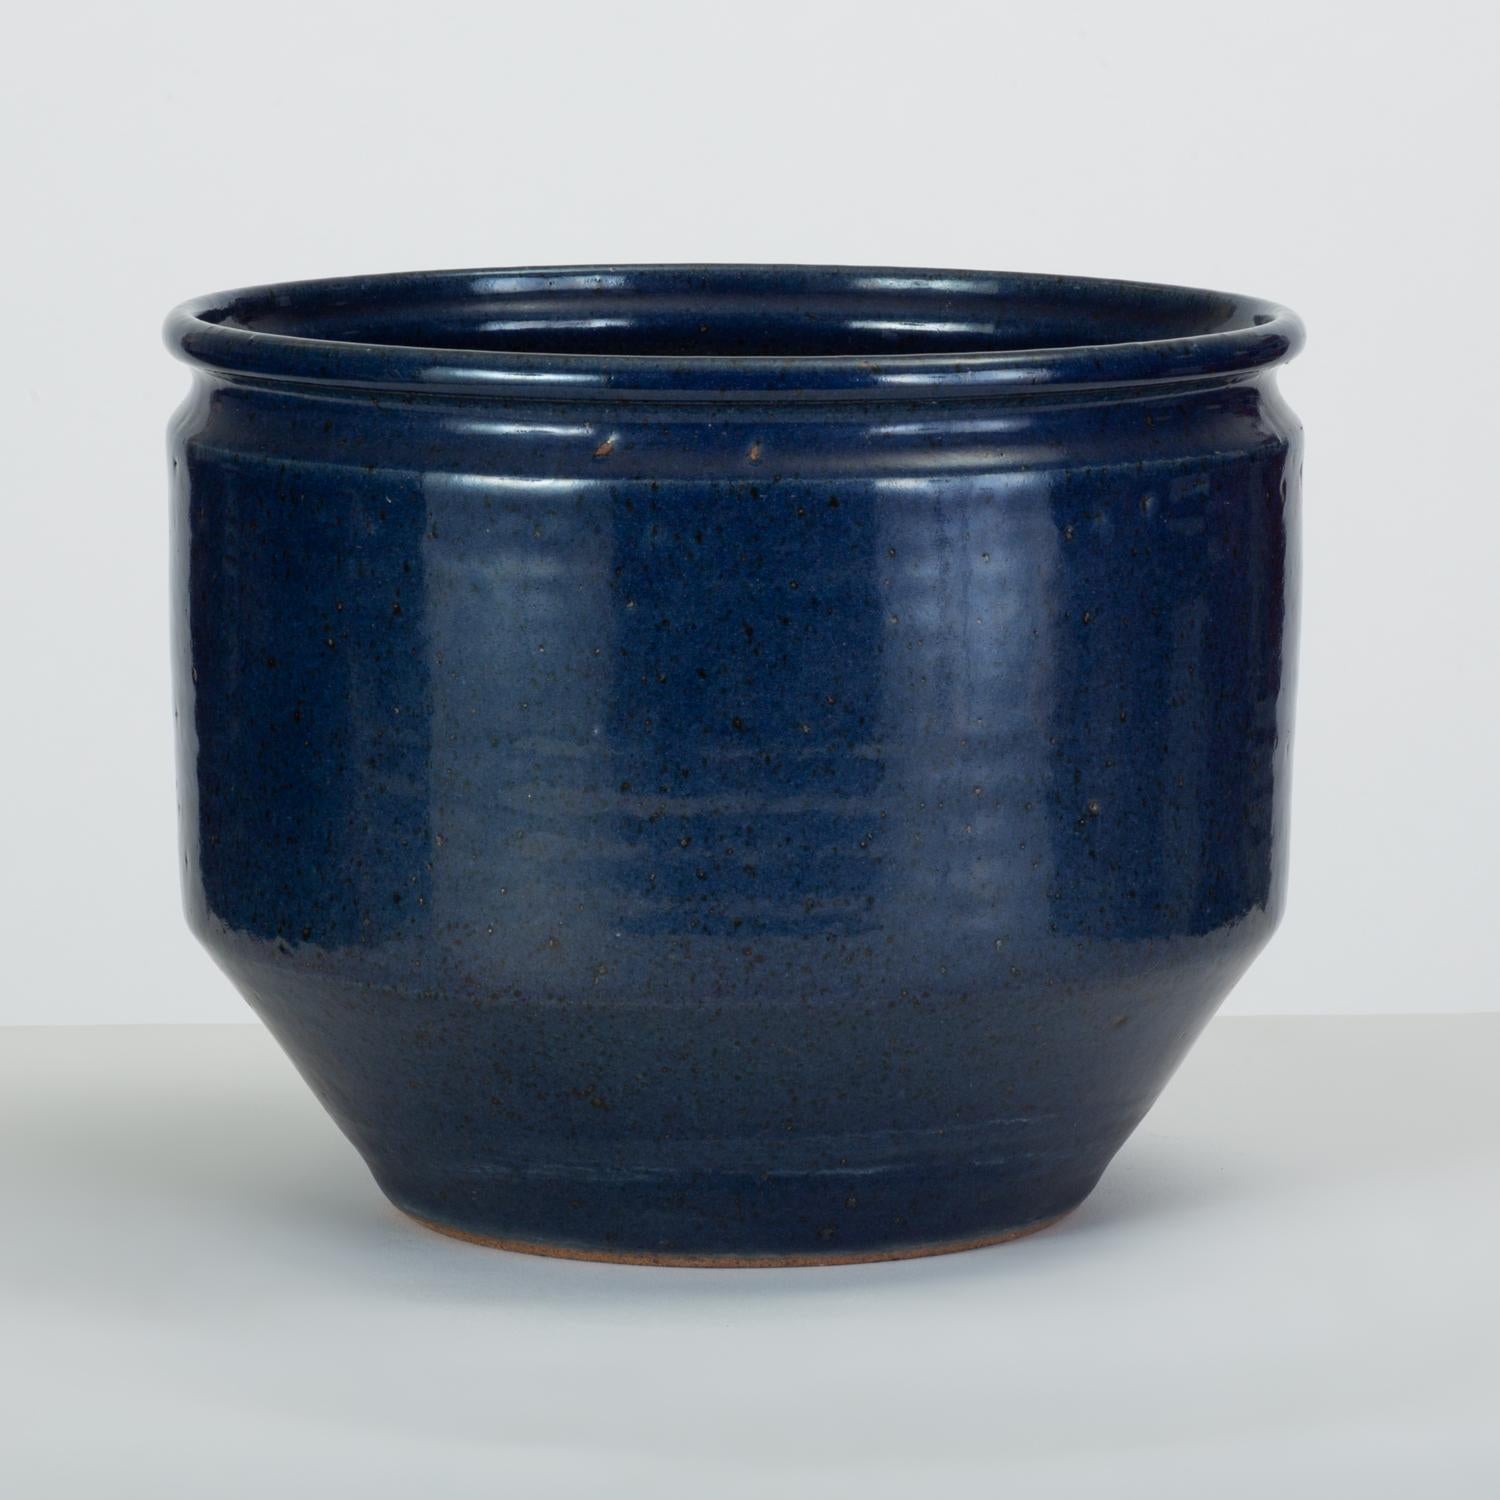 Pair of Blue-Glazed Earthgender Bowl Planters, David Cressey and Robert Maxwell 8